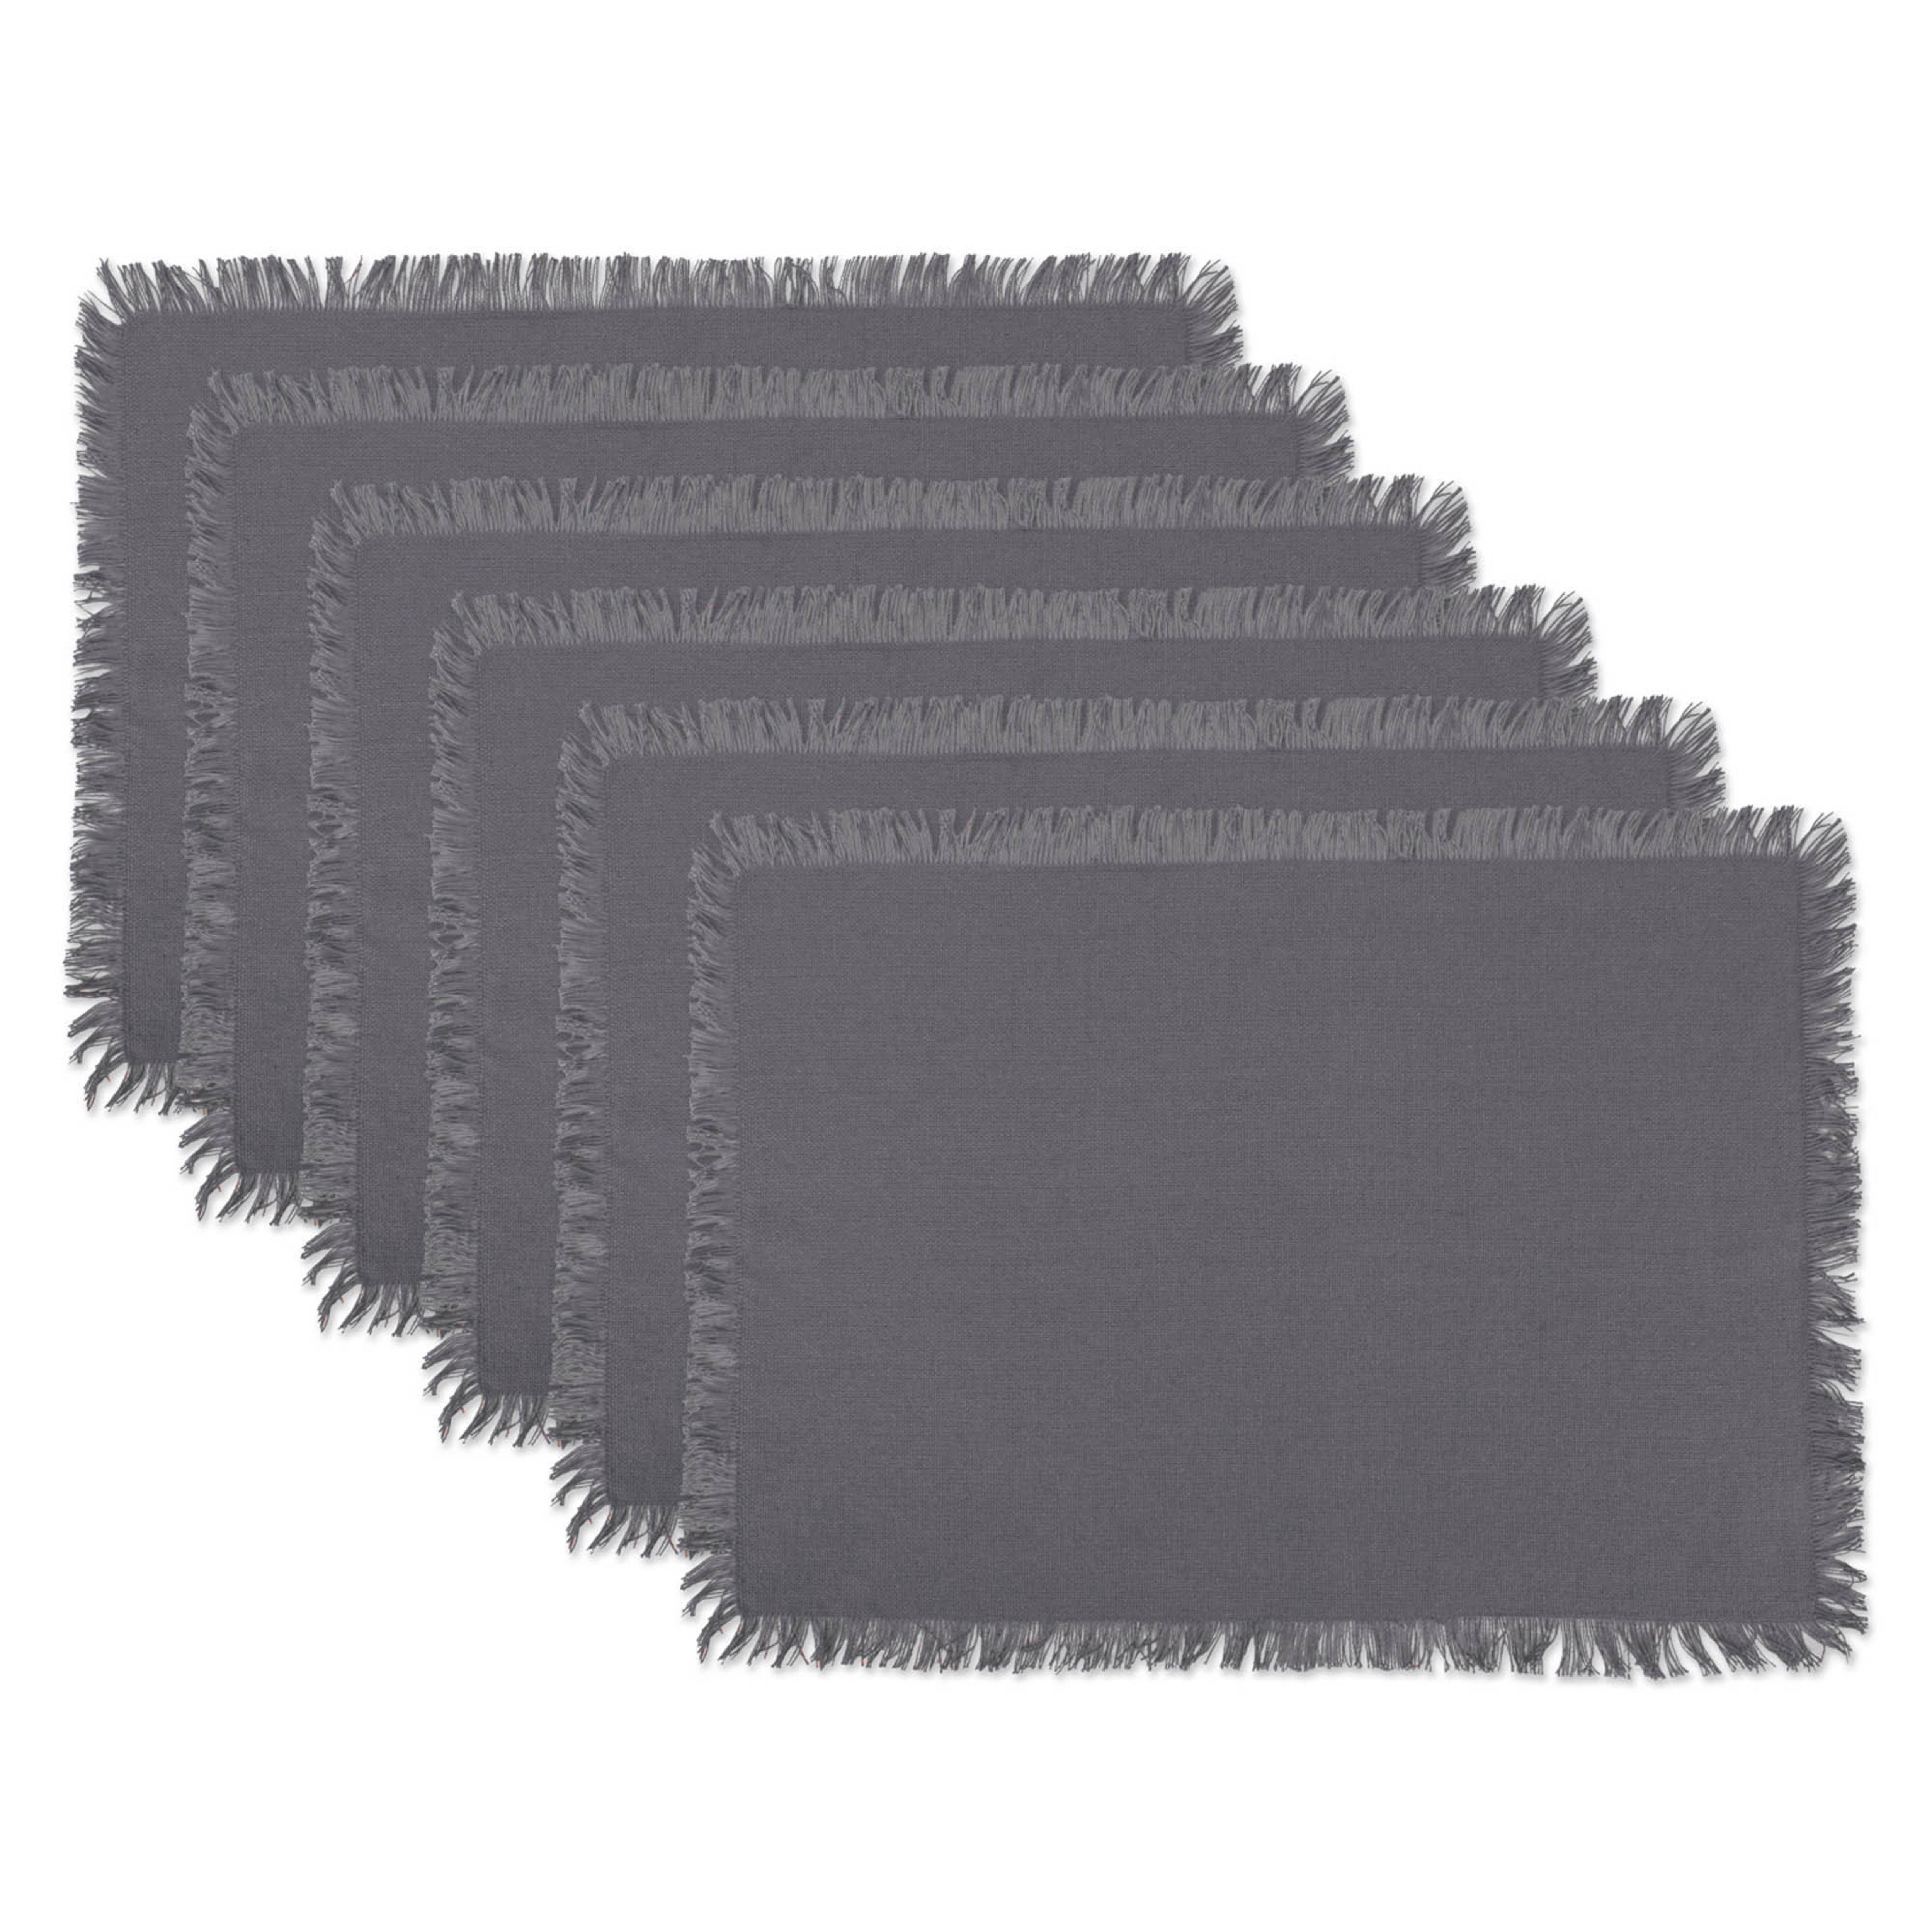 Picture of Design Imports CAMZ37573 13 x 19 in. Solid Gray Heavyweight Fringed Placemat - Set of 6